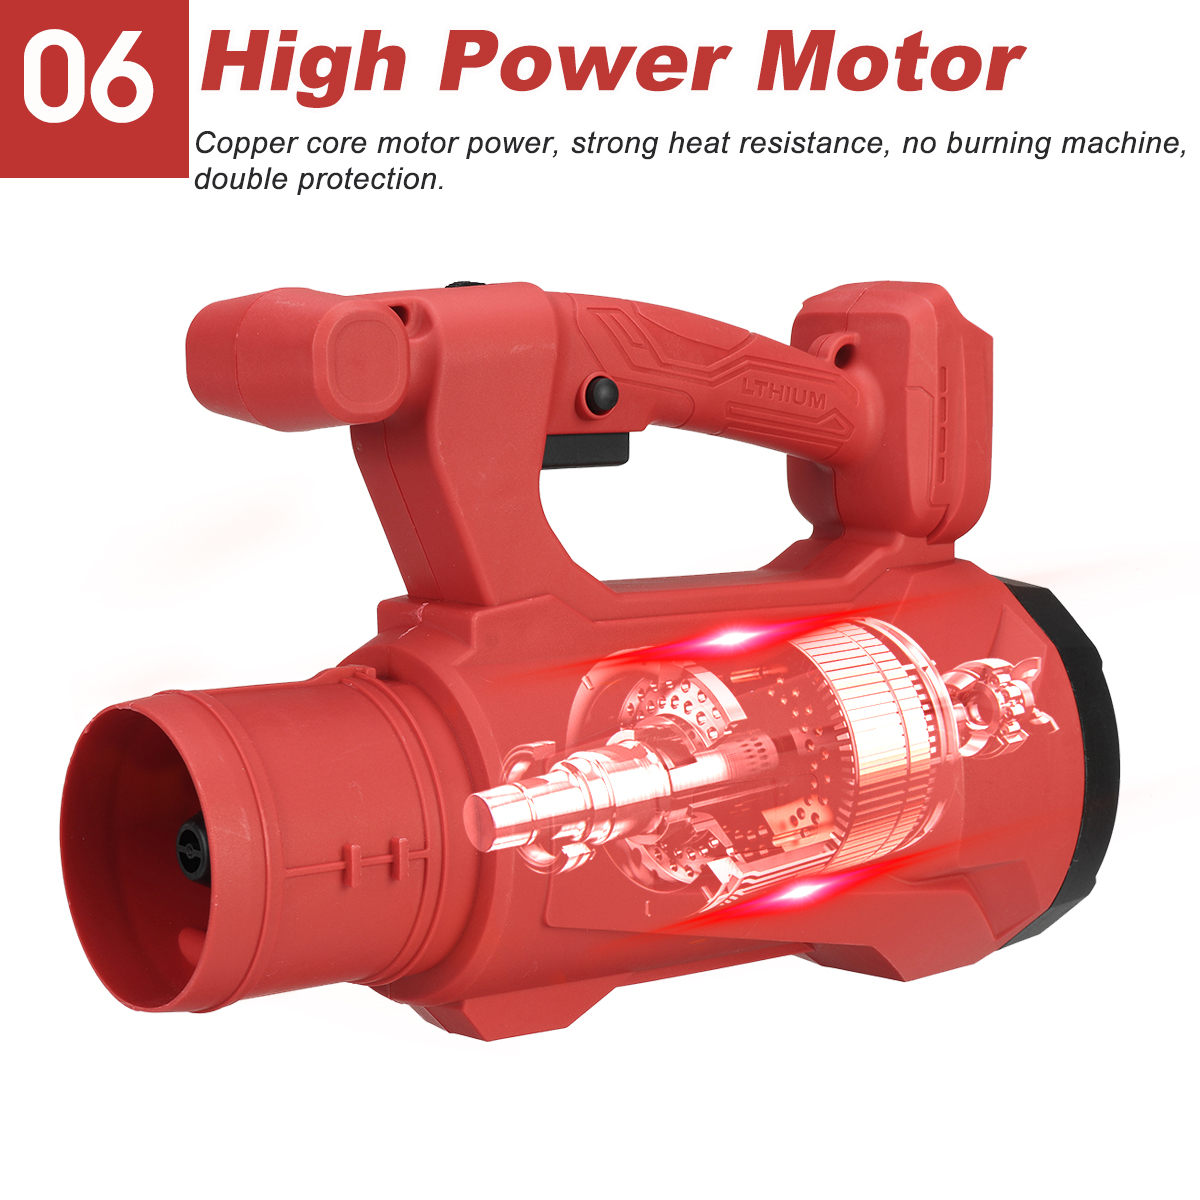 388VF-Cordless-Electric-Air-Blower-Vacuum-Cleannig-Blowing-Dust-Collector-Leaf-Blower-W-None12-Batte-1867747-6